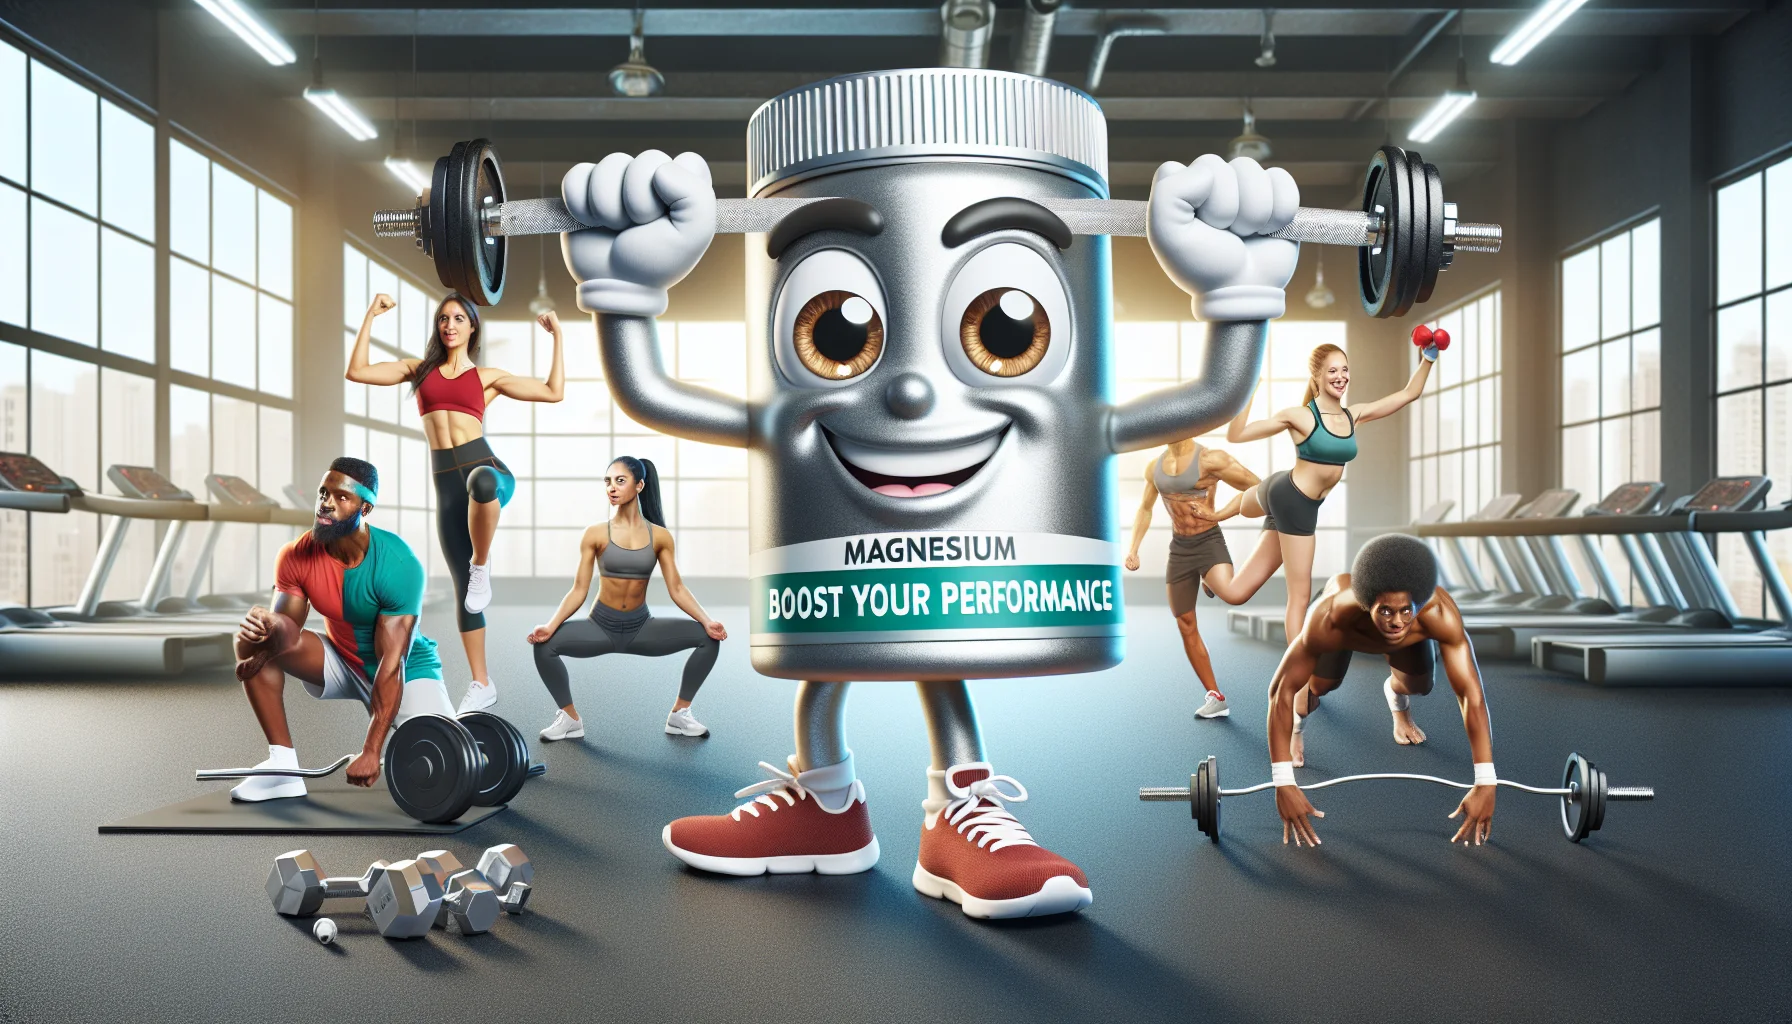 Generate an engaging and amusing image featuring magnesium sulfite. Picture it personified with animated eyes and a broad cheerful smile, holding a banner that reads, 'Boost Your Performance!' This lively character is situated in the elegant setting of a well-equipped gym, with various athletes of different genders and descents undertaking their workouts. A Caucasian female is doing yoga, a Hispanic male is weightlifting, a Black female is jogging on the treadmill, a Middle-Eastern male is boxing, and a South Asian female is doing stretching exercises. Striking elements such as vivid colors and a glowing aura around the magnesium character can be incorporated to attract viewers' attention towards sports supplements.